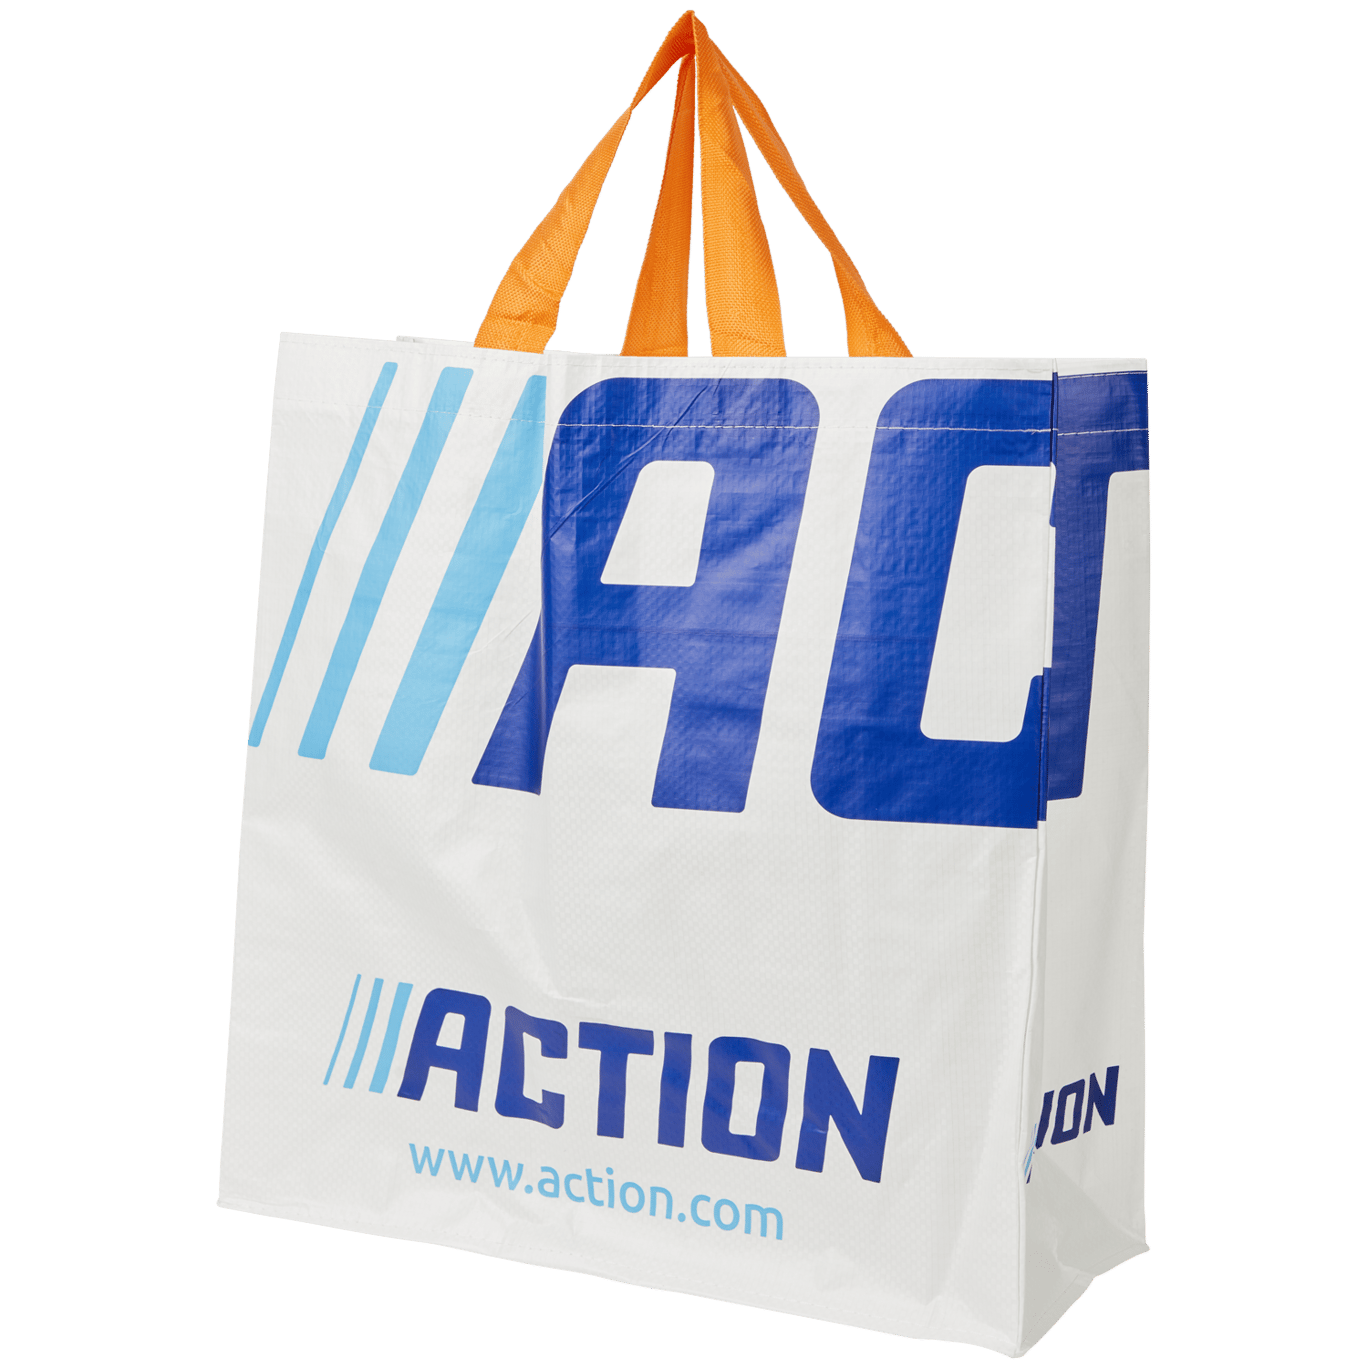 Action | Action.com